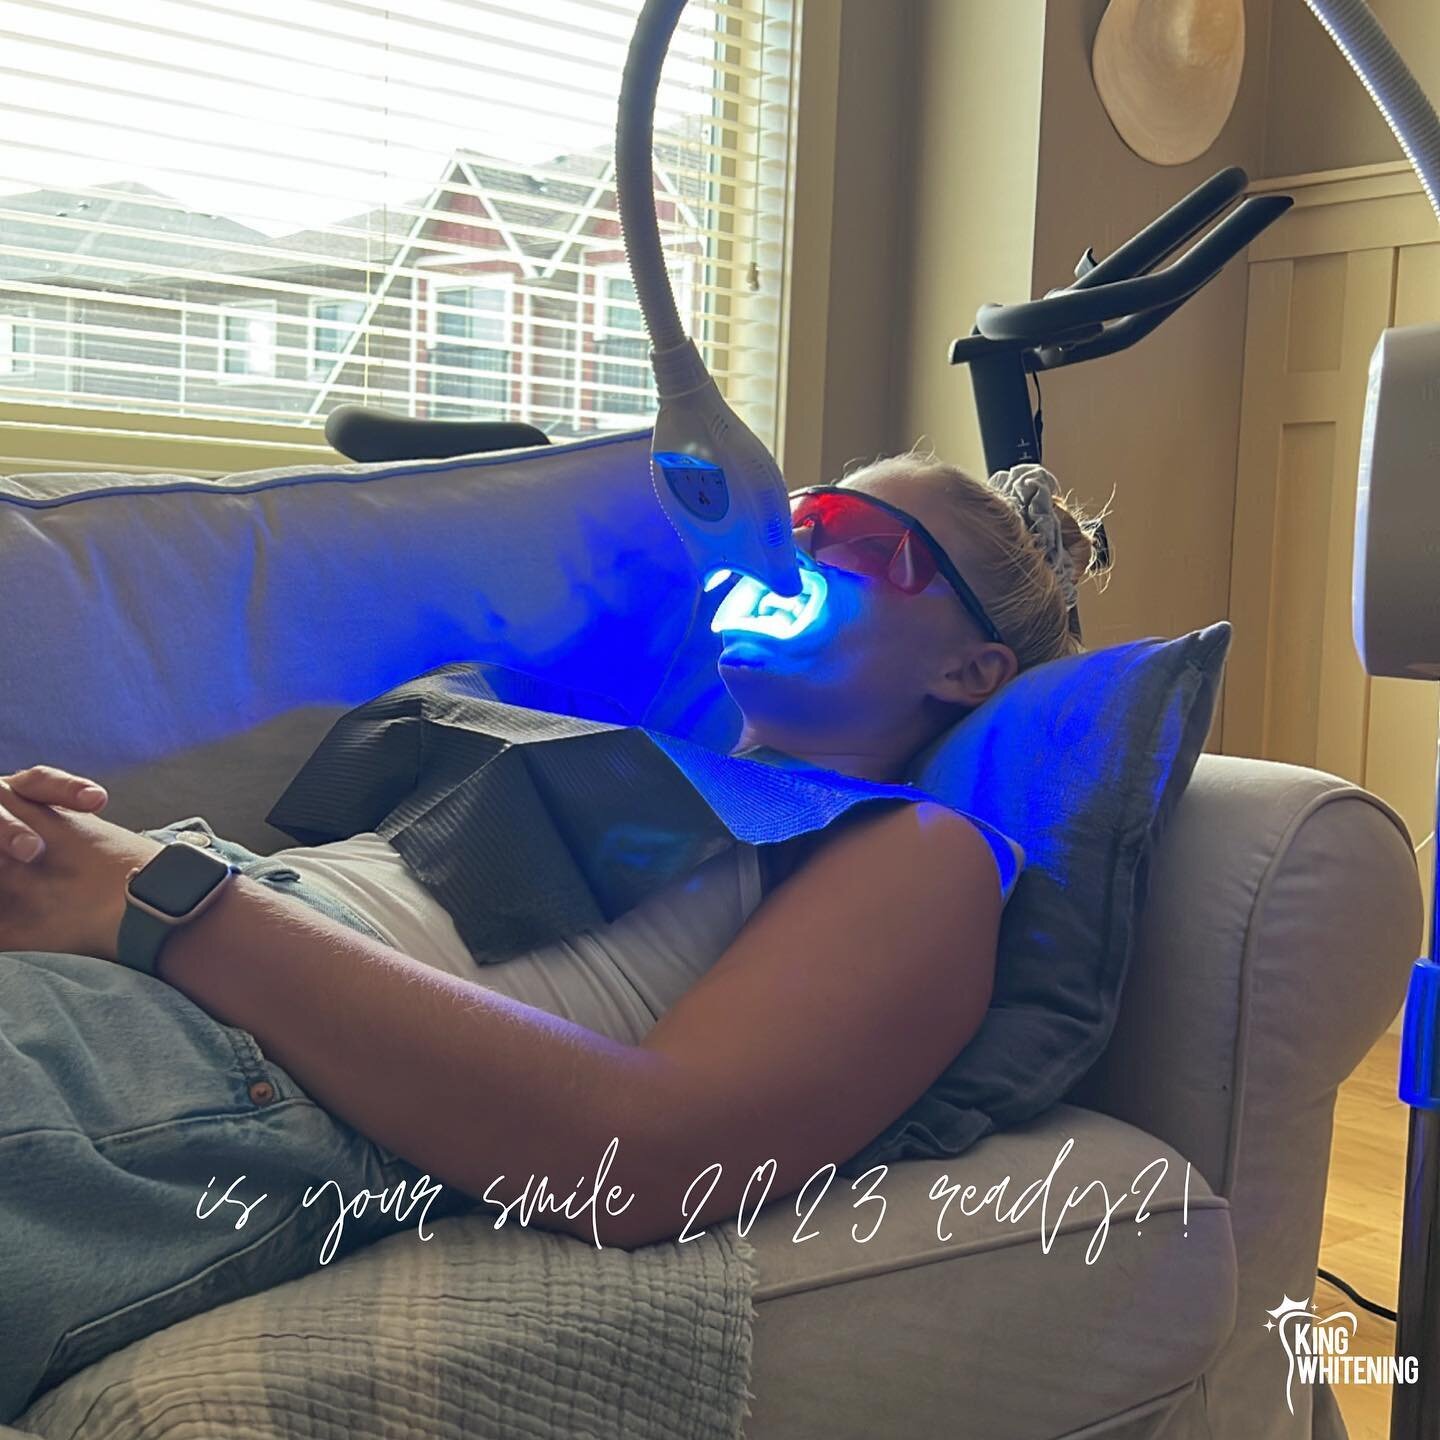 Teeth whitening by a dental professional in the comfort of your own 🏡 

Zero-minimal sensitivity &amp; a whiter smile in 45 minutes ⏰ 

Book with a friend in the new year to save 15% on your session⚡️
.
.
.
.
.
#mobileteethwhitening #britishcolumbia